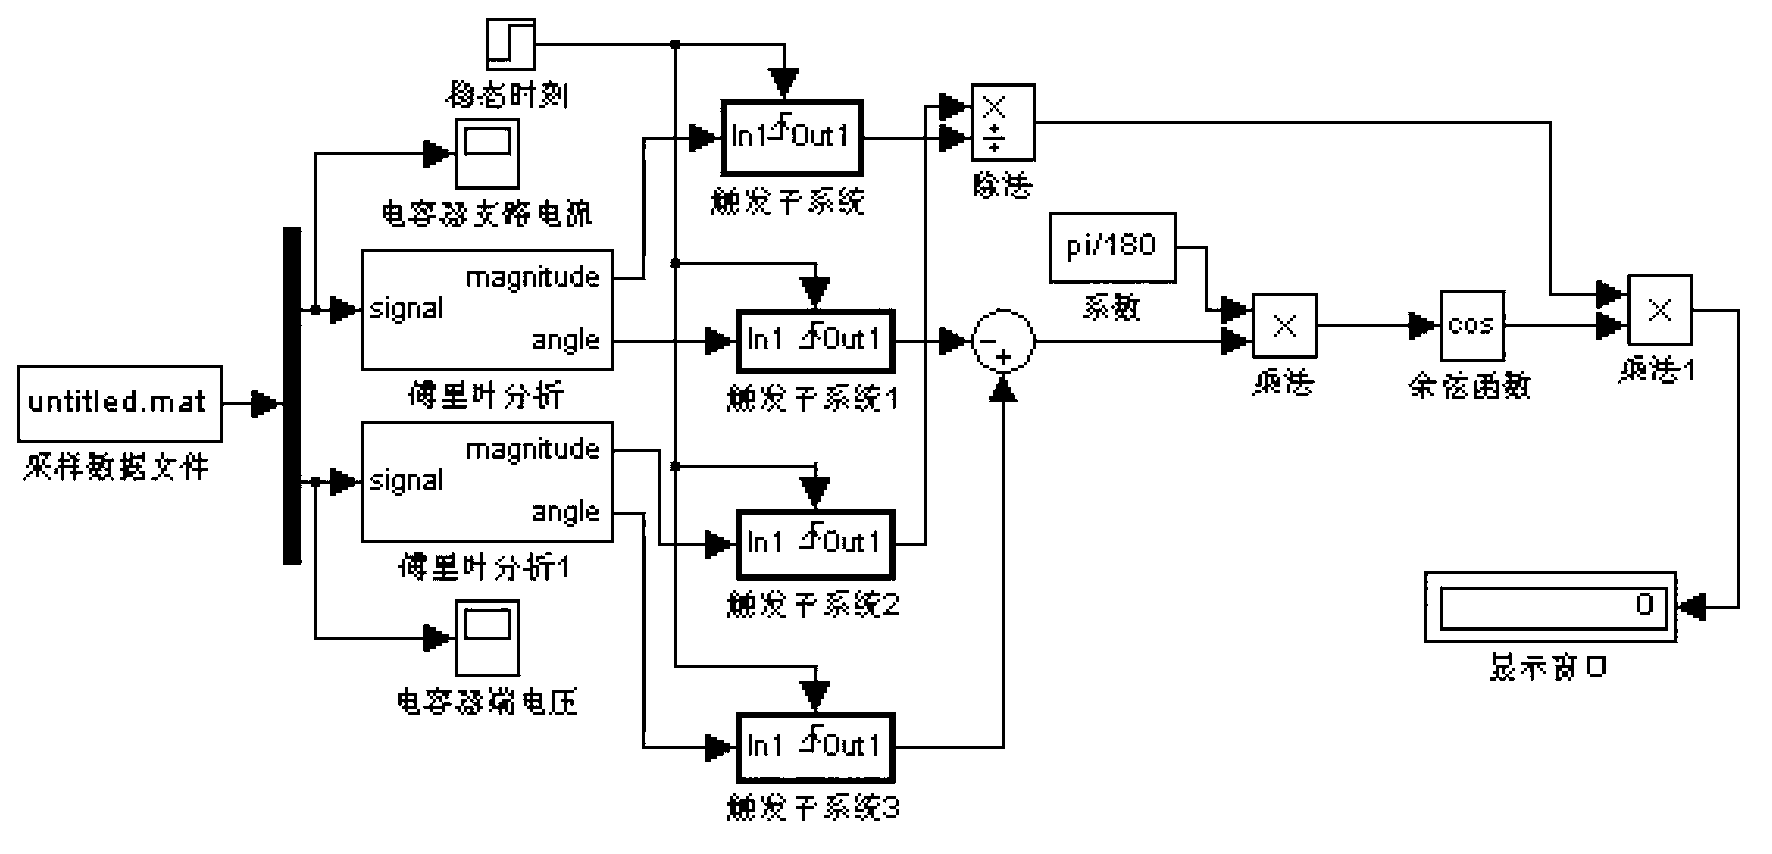 Method for measuring and predicting capacitor ESR (Equivalent Series Resistance) values of switching power supplies on line